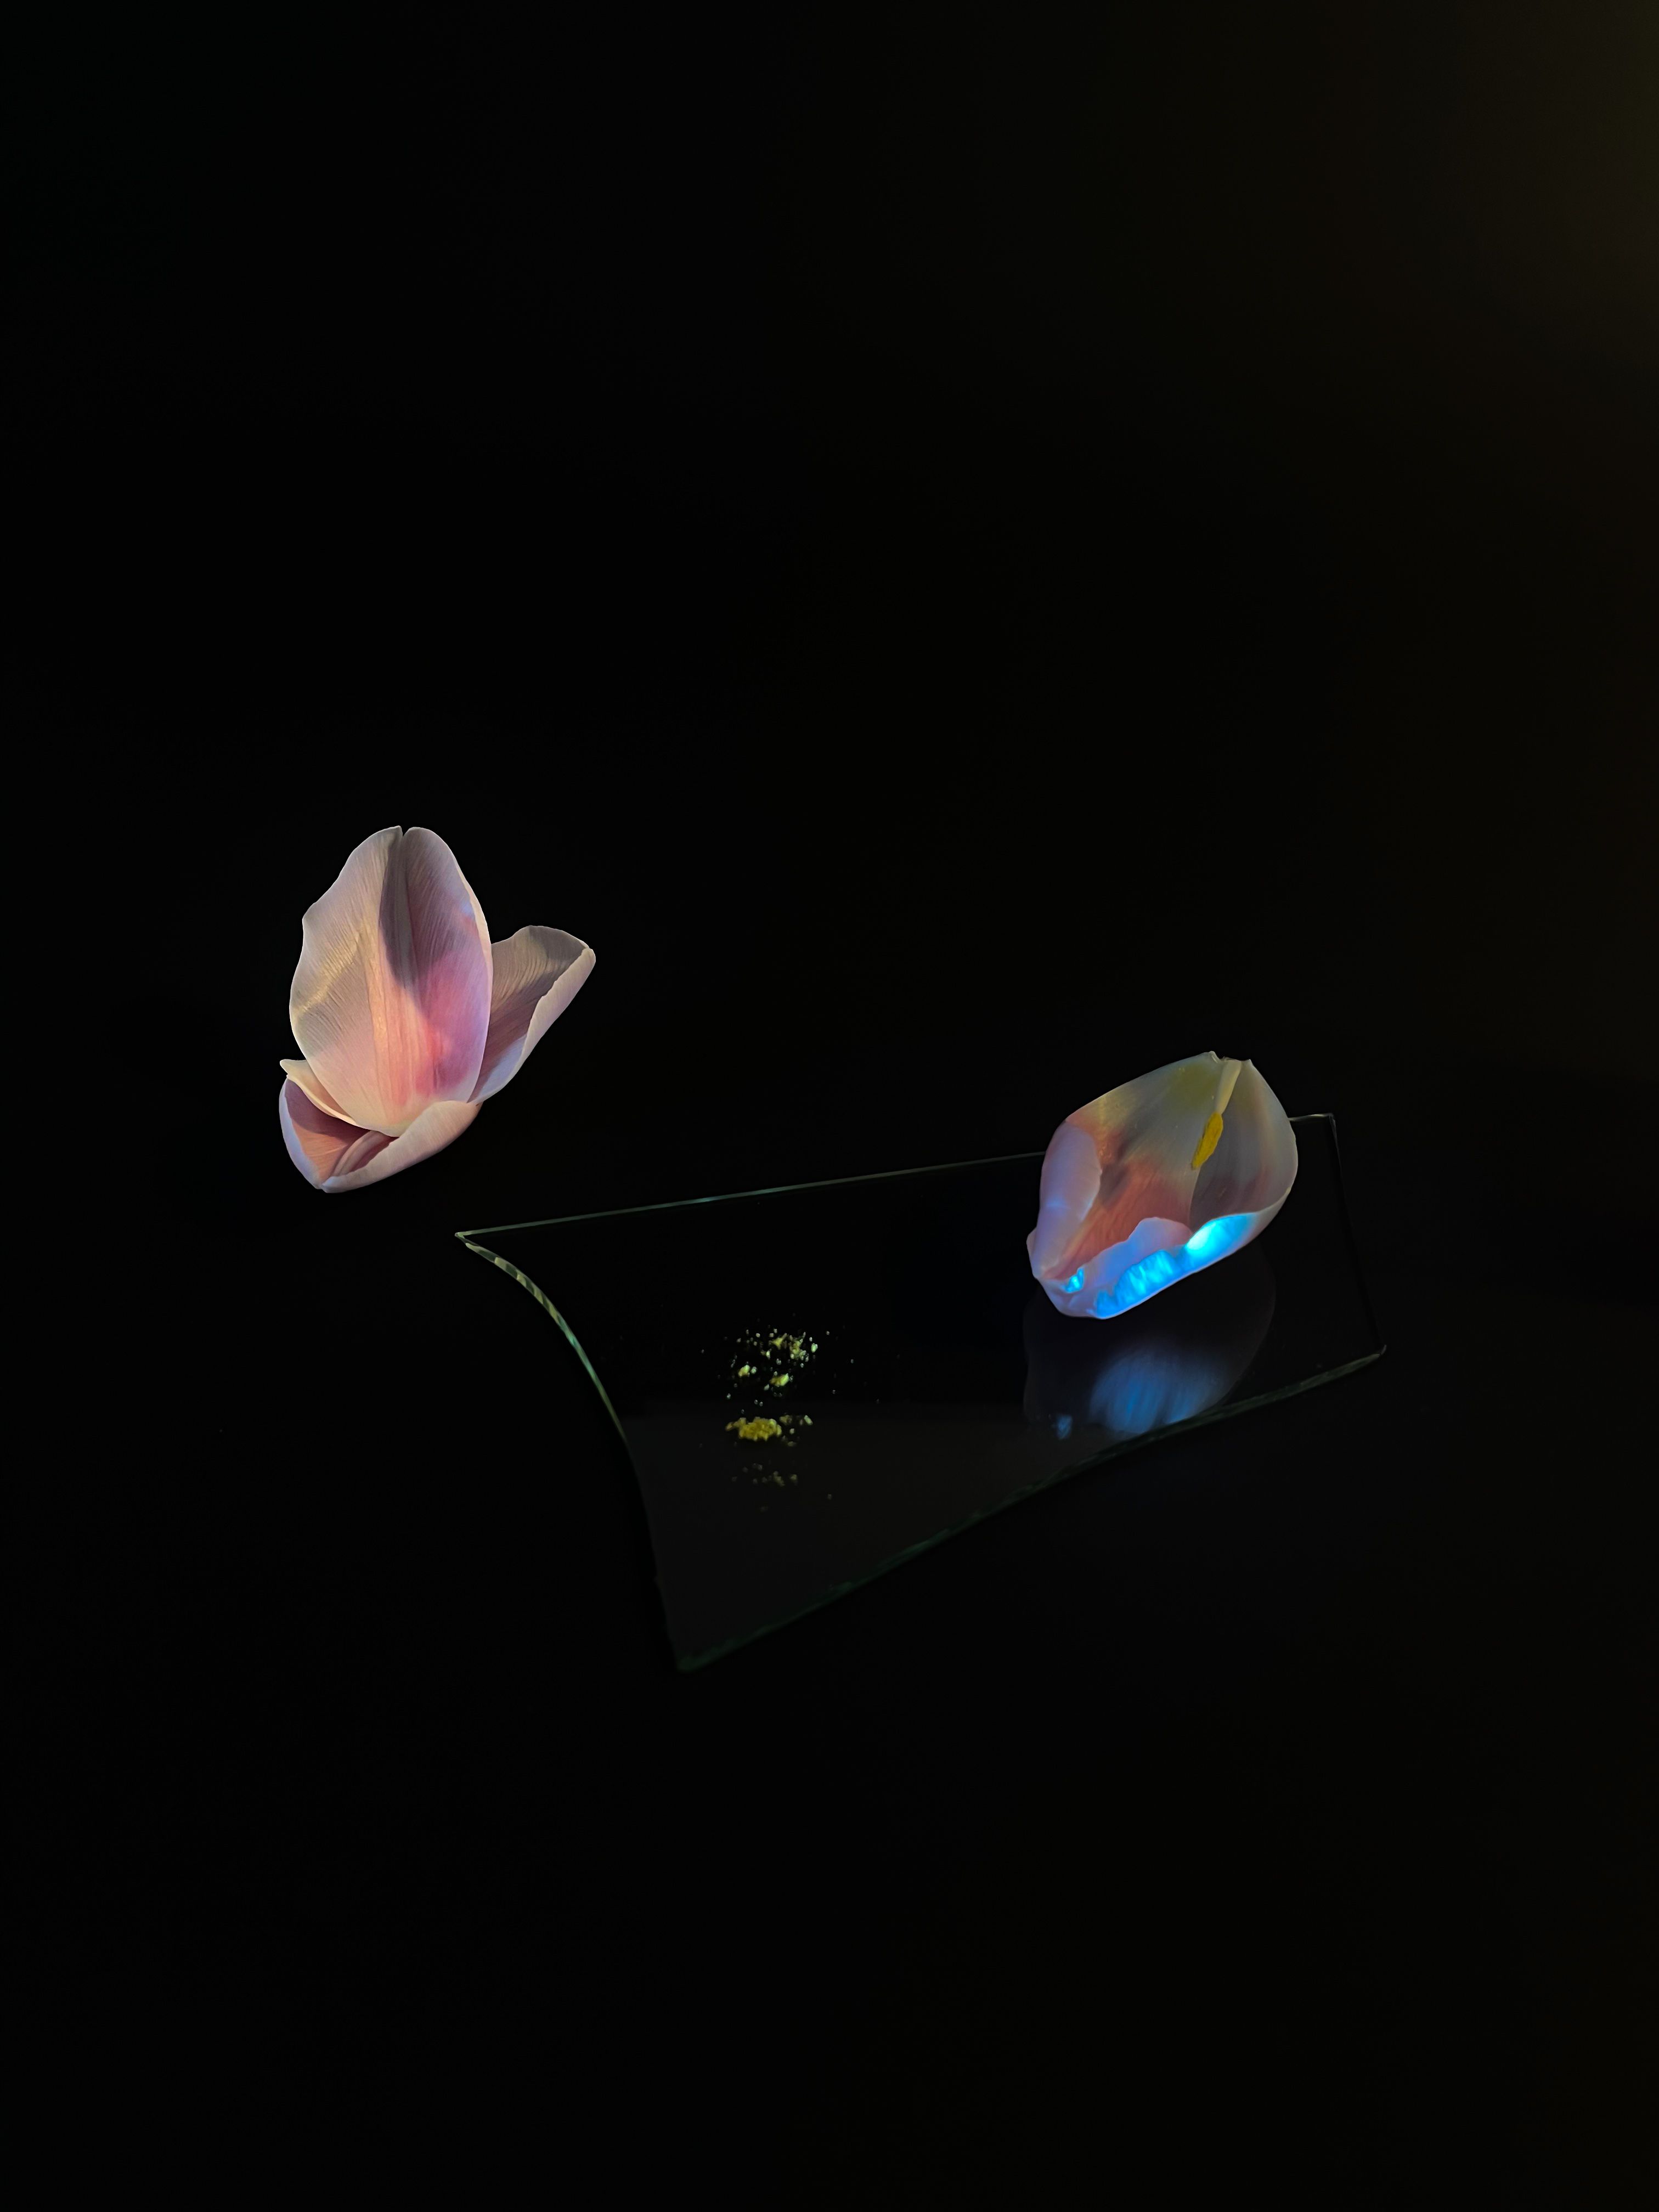 Tulip Blossoms combined with a shard of glass and pollen, lightened up with a flash lamp